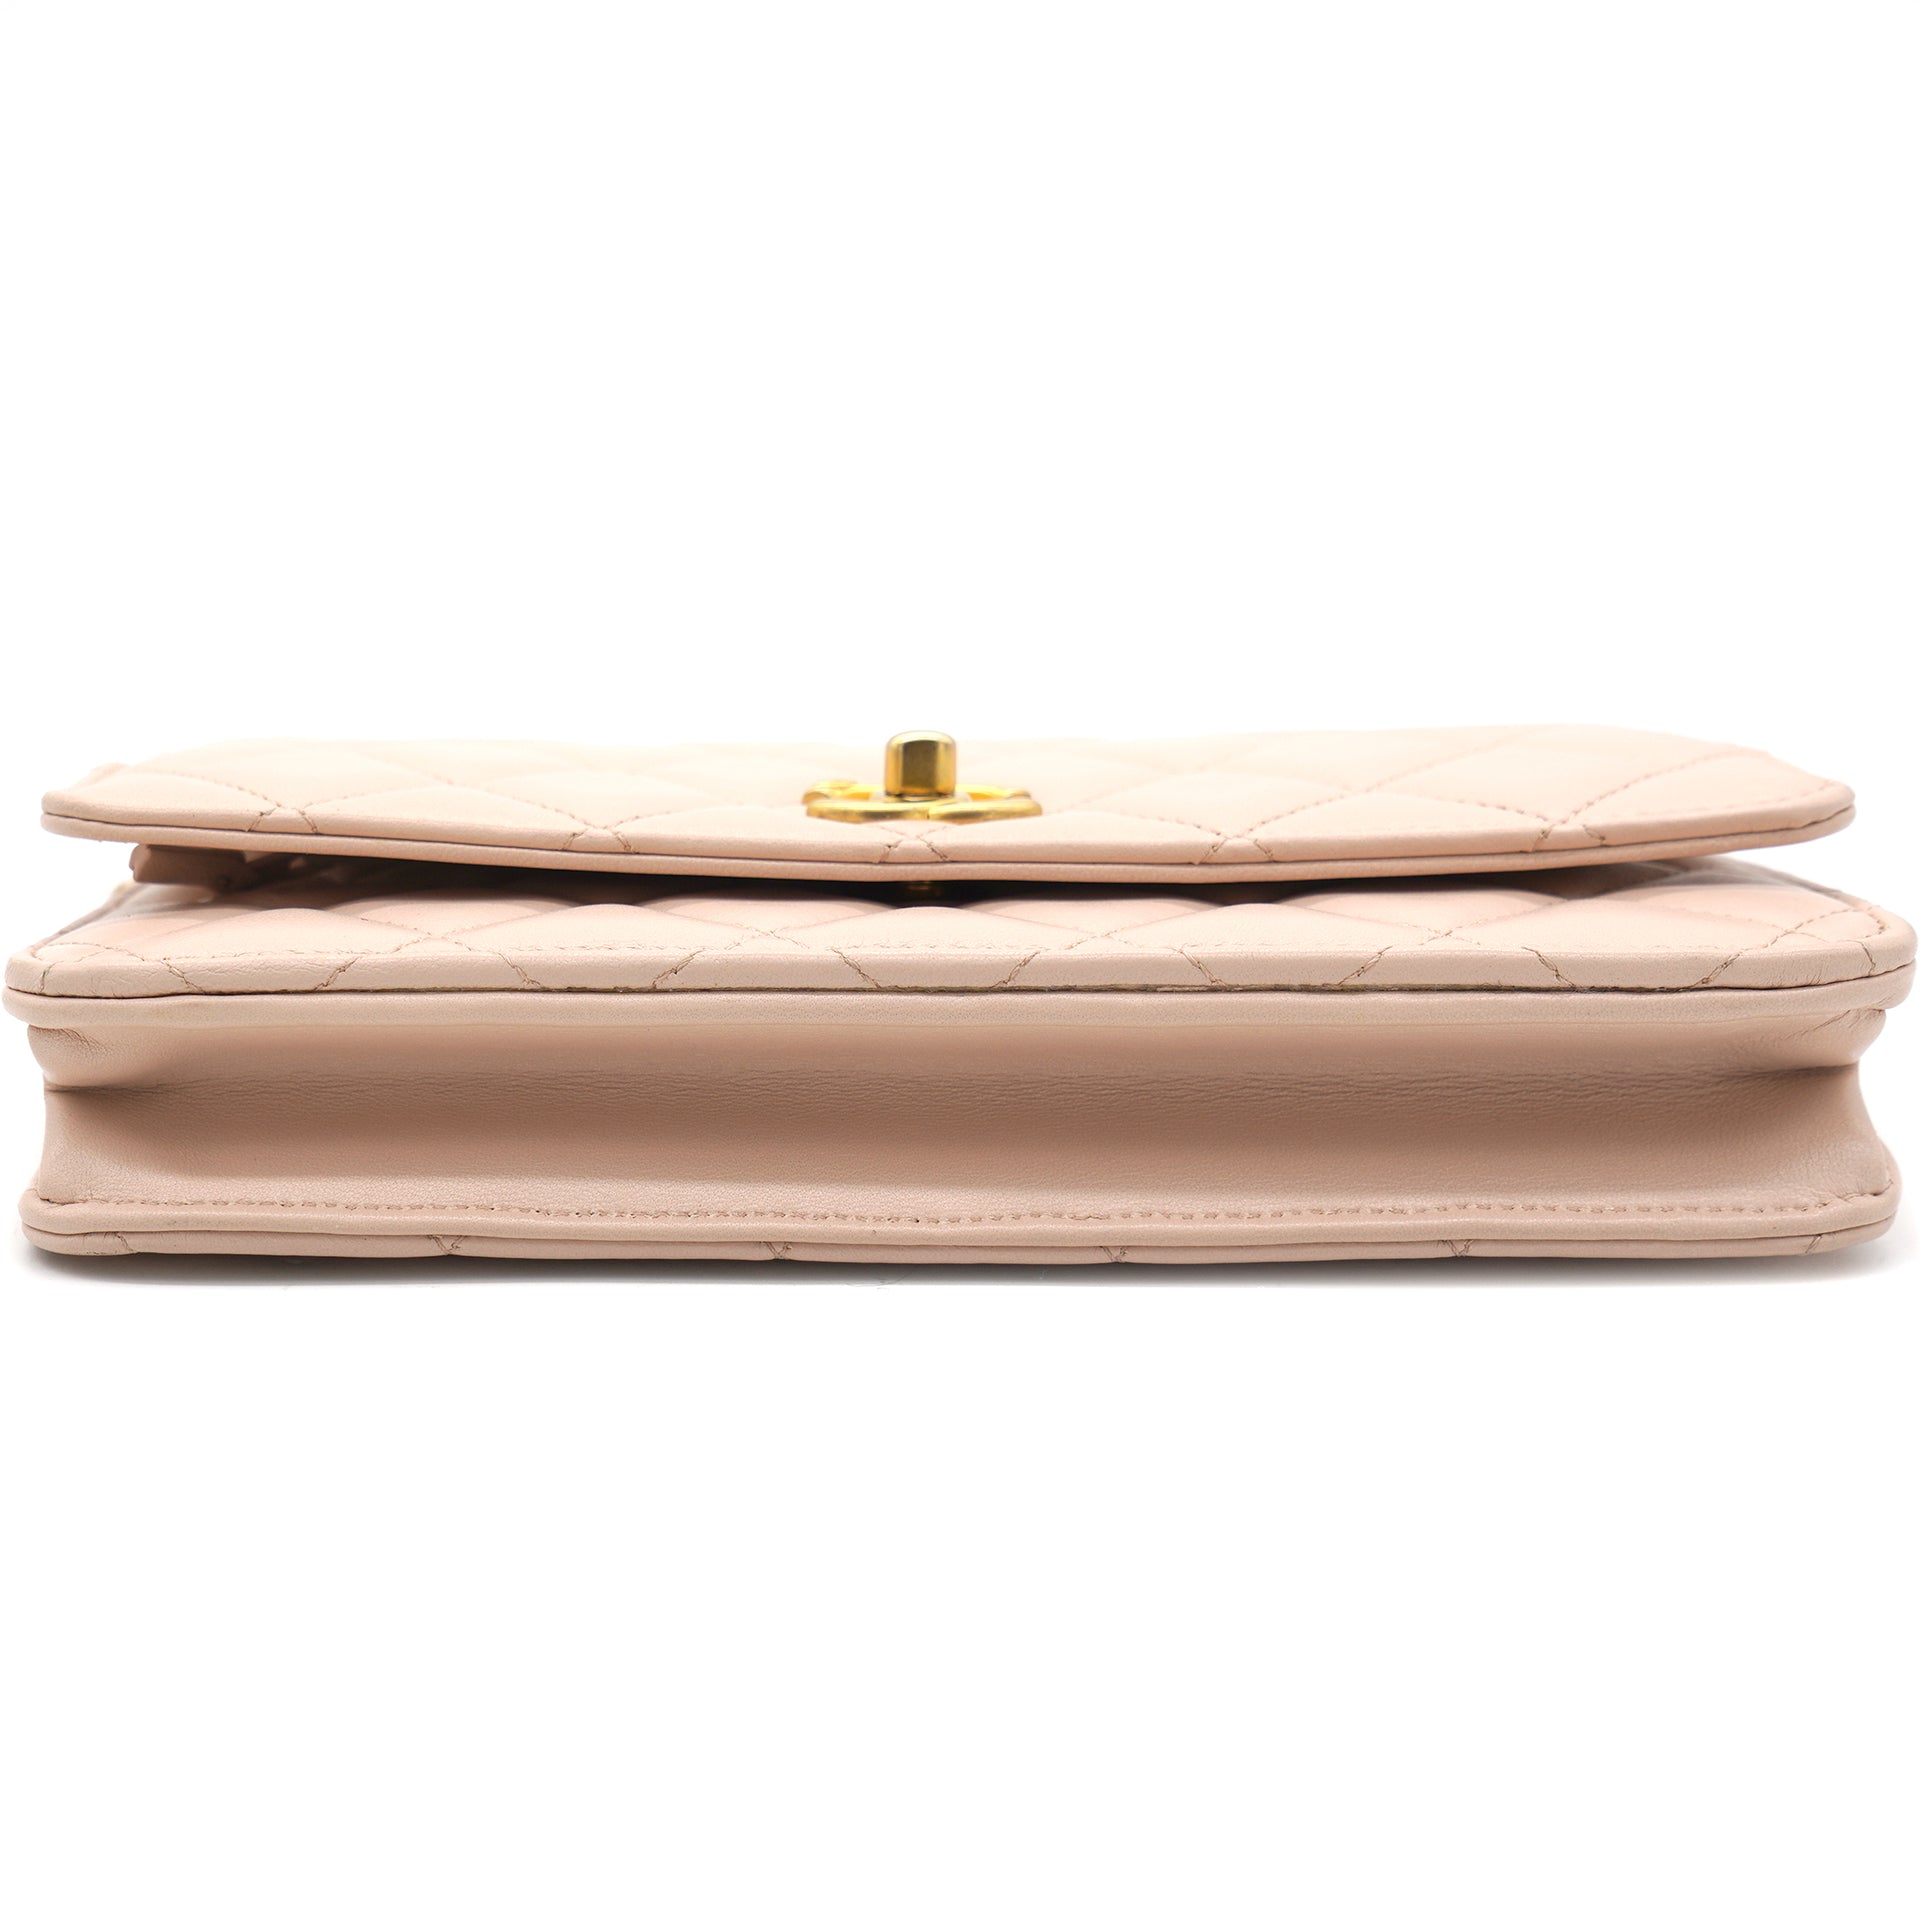 Lambskin Quilted CC Pearl Crush Wallet on Chain WOC Pink